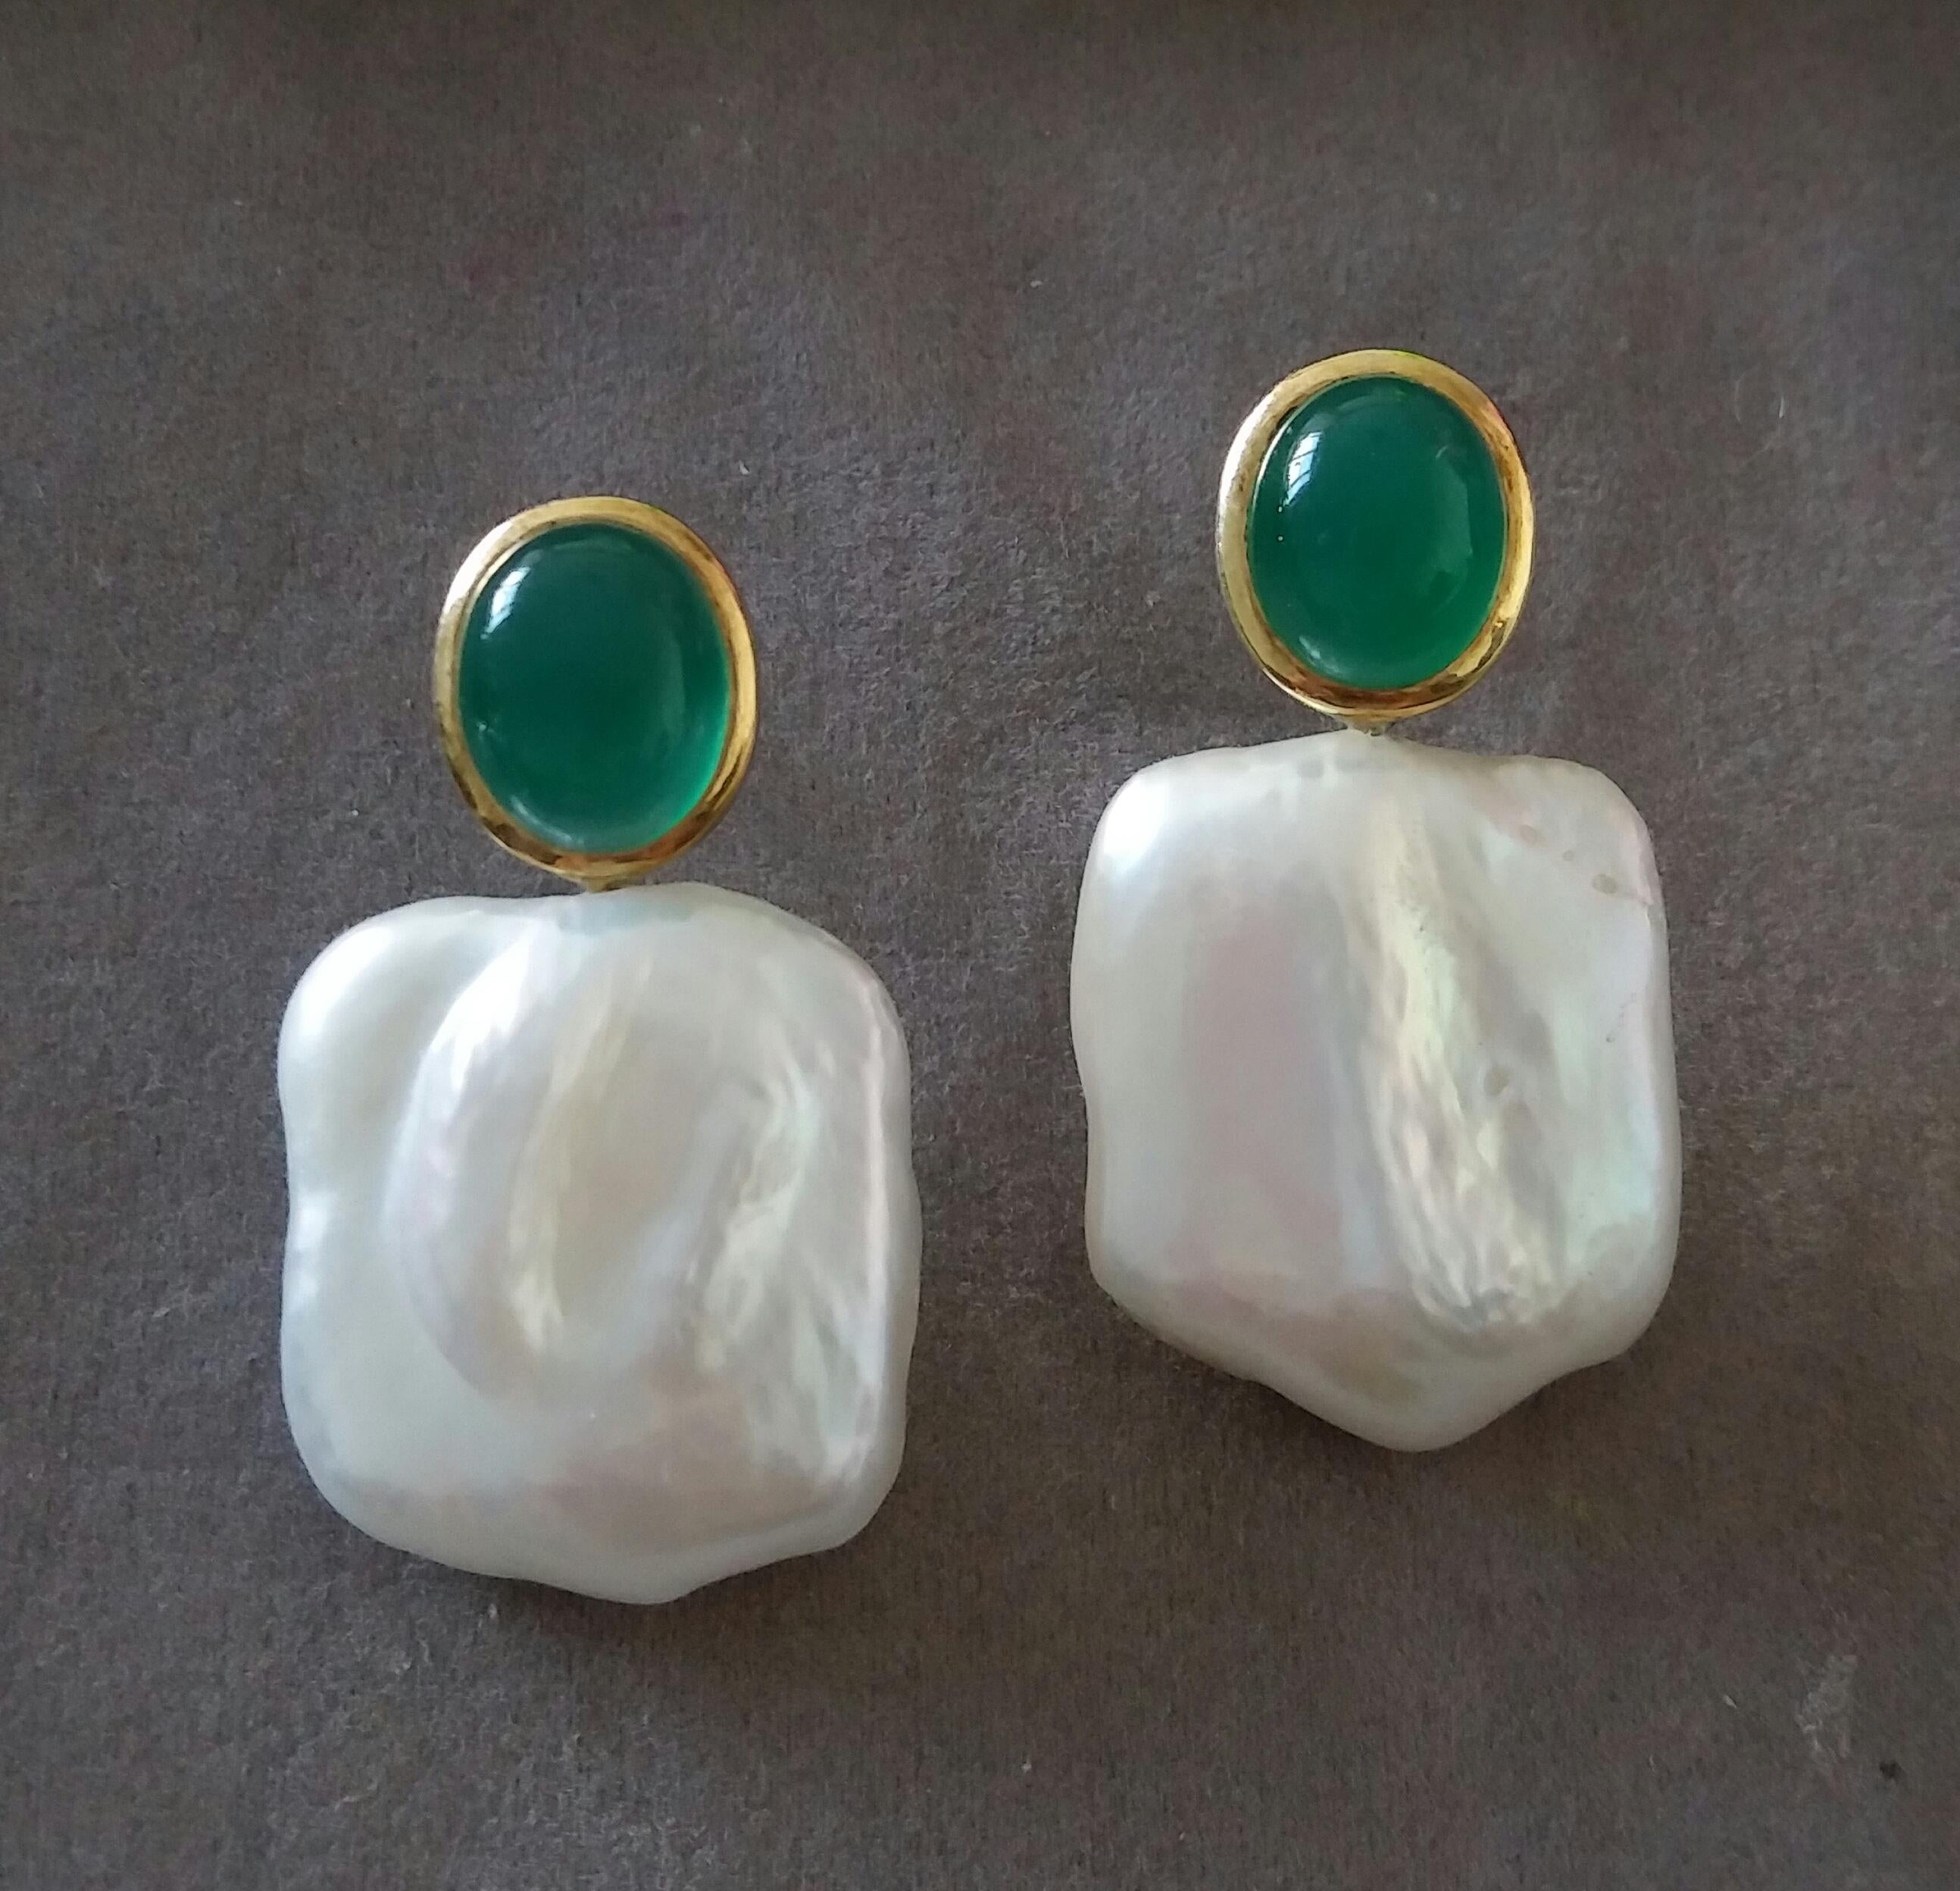 These simple chic and handmade stud earrings have a pair of Oval Shape Natural Green Onyx Cabs measuring 9 x 11 mm set in solid 14 Kt. yellow gold bezel on the top and in the lower parts 2 excellent luster White Square Shape Baroque Pearls measuring